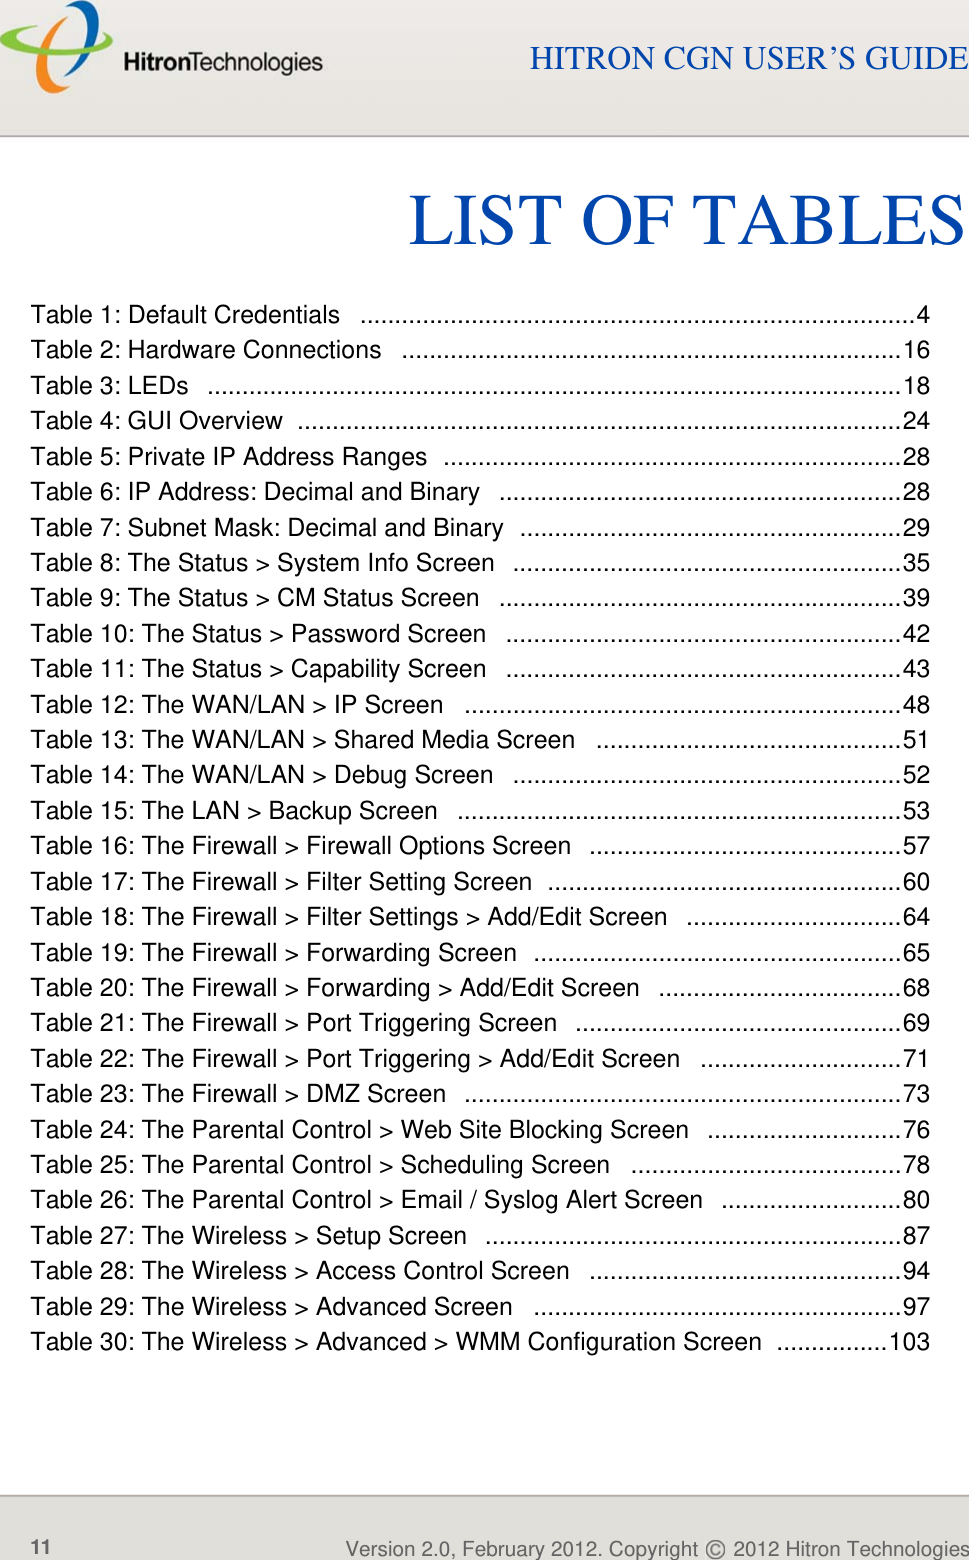 LIST OF TABLESVersion 2.0, February 2012. Copyright   2012 Hitron Technologies11HITRON CGN USER’S GUIDELIST OF TABLESTable 1: Default Credentials   ................................................................................4Table 2: Hardware Connections   ........................................................................16Table 3: LEDs   ....................................................................................................18Table 4: GUI Overview  .......................................................................................24Table 5: Private IP Address Ranges  ..................................................................28Table 6: IP Address: Decimal and Binary   ..........................................................28Table 7: Subnet Mask: Decimal and Binary  .......................................................29Table 8: The Status &gt; System Info Screen   ........................................................35Table 9: The Status &gt; CM Status Screen   ..........................................................39Table 10: The Status &gt; Password Screen   .........................................................42Table 11: The Status &gt; Capability Screen   .........................................................43Table 12: The WAN/LAN &gt; IP Screen   ...............................................................48Table 13: The WAN/LAN &gt; Shared Media Screen   ............................................51Table 14: The WAN/LAN &gt; Debug Screen   ........................................................52Table 15: The LAN &gt; Backup Screen  ................................................................53Table 16: The Firewall &gt; Firewall Options Screen   .............................................57Table 17: The Firewall &gt; Filter Setting Screen  ...................................................60Table 18: The Firewall &gt; Filter Settings &gt; Add/Edit Screen   ...............................64Table 19: The Firewall &gt; Forwarding Screen  .....................................................65Table 20: The Firewall &gt; Forwarding &gt; Add/Edit Screen   ...................................68Table 21: The Firewall &gt; Port Triggering Screen   ...............................................69Table 22: The Firewall &gt; Port Triggering &gt; Add/Edit Screen   .............................71Table 23: The Firewall &gt; DMZ Screen   ...............................................................73Table 24: The Parental Control &gt; Web Site Blocking Screen   ............................76Table 25: The Parental Control &gt; Scheduling Screen   .......................................78Table 26: The Parental Control &gt; Email / Syslog Alert Screen   ..........................80Table 27: The Wireless &gt; Setup Screen   ............................................................87Table 28: The Wireless &gt; Access Control Screen   .............................................94Table 29: The Wireless &gt; Advanced Screen   .....................................................97Table 30: The Wireless &gt; Advanced &gt; WMM Configuration Screen  ................103